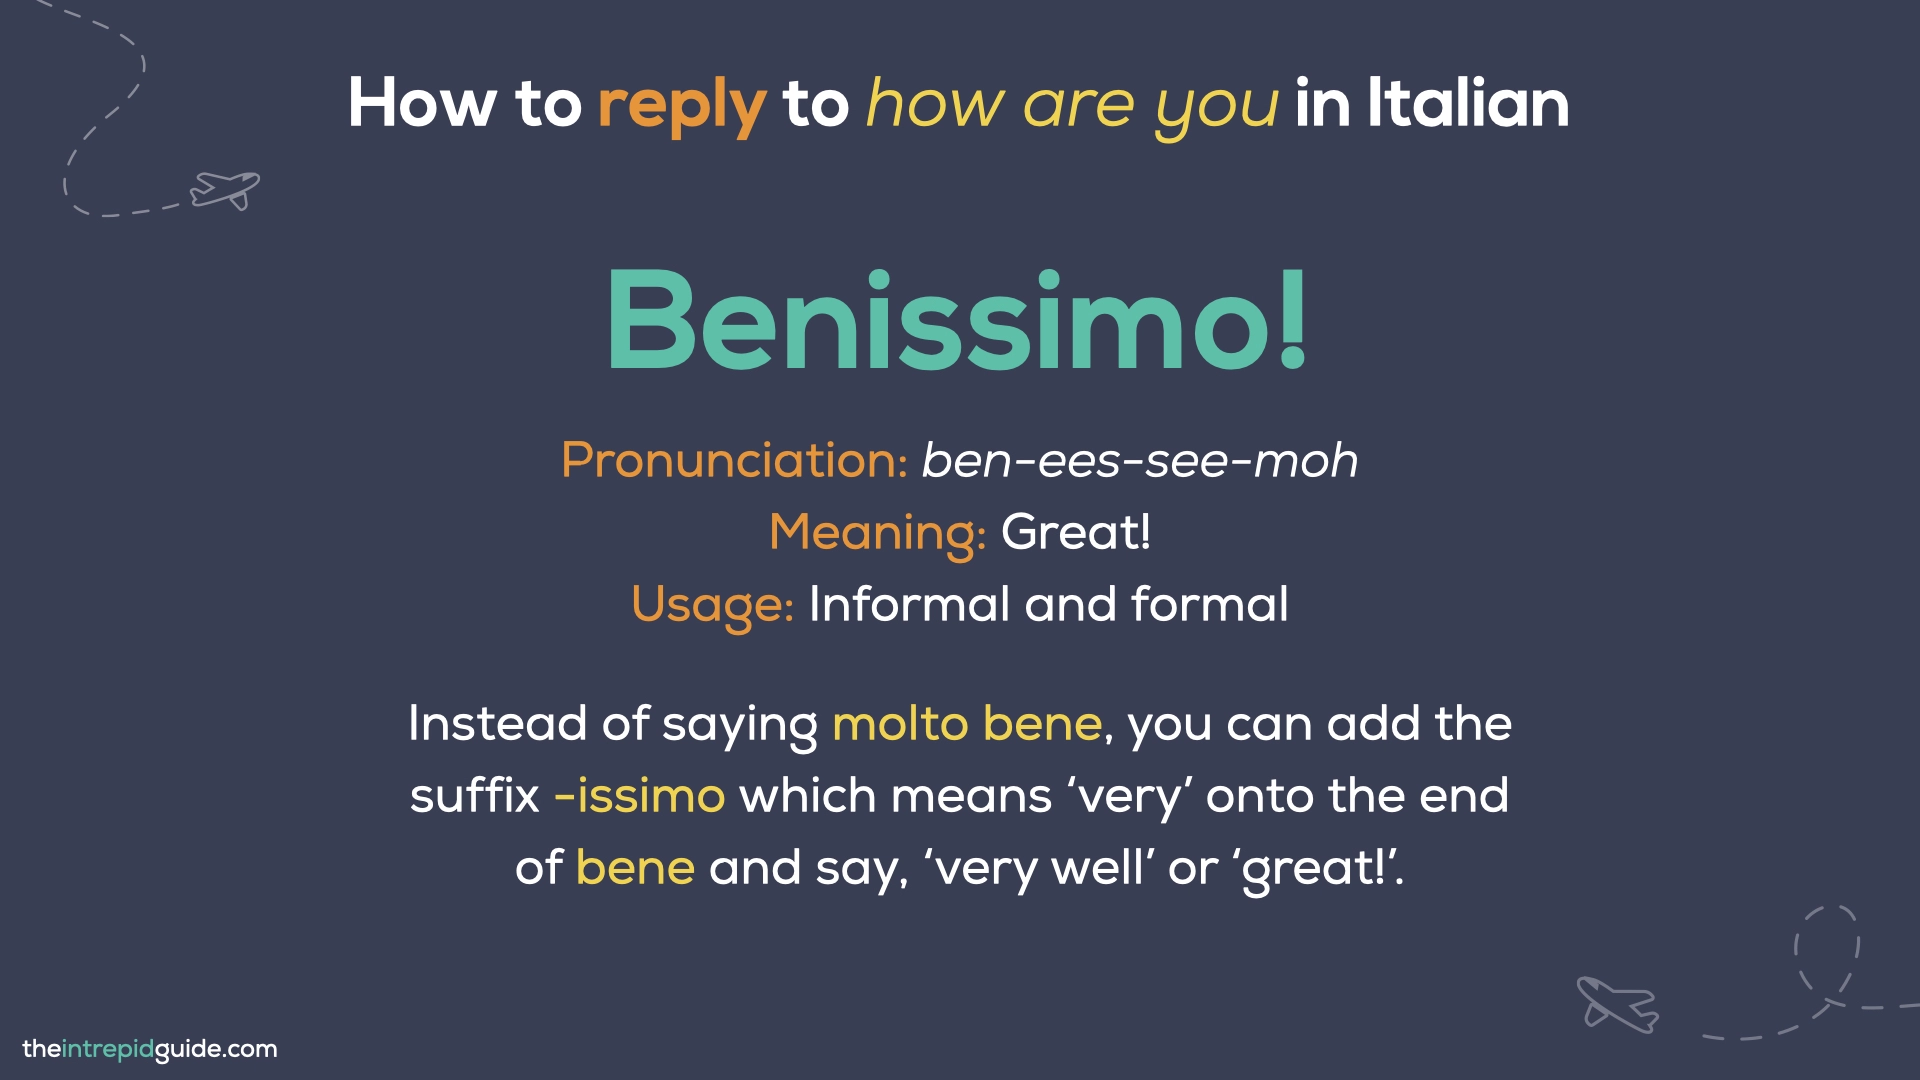 How to say How are you in Italian - Benissimo